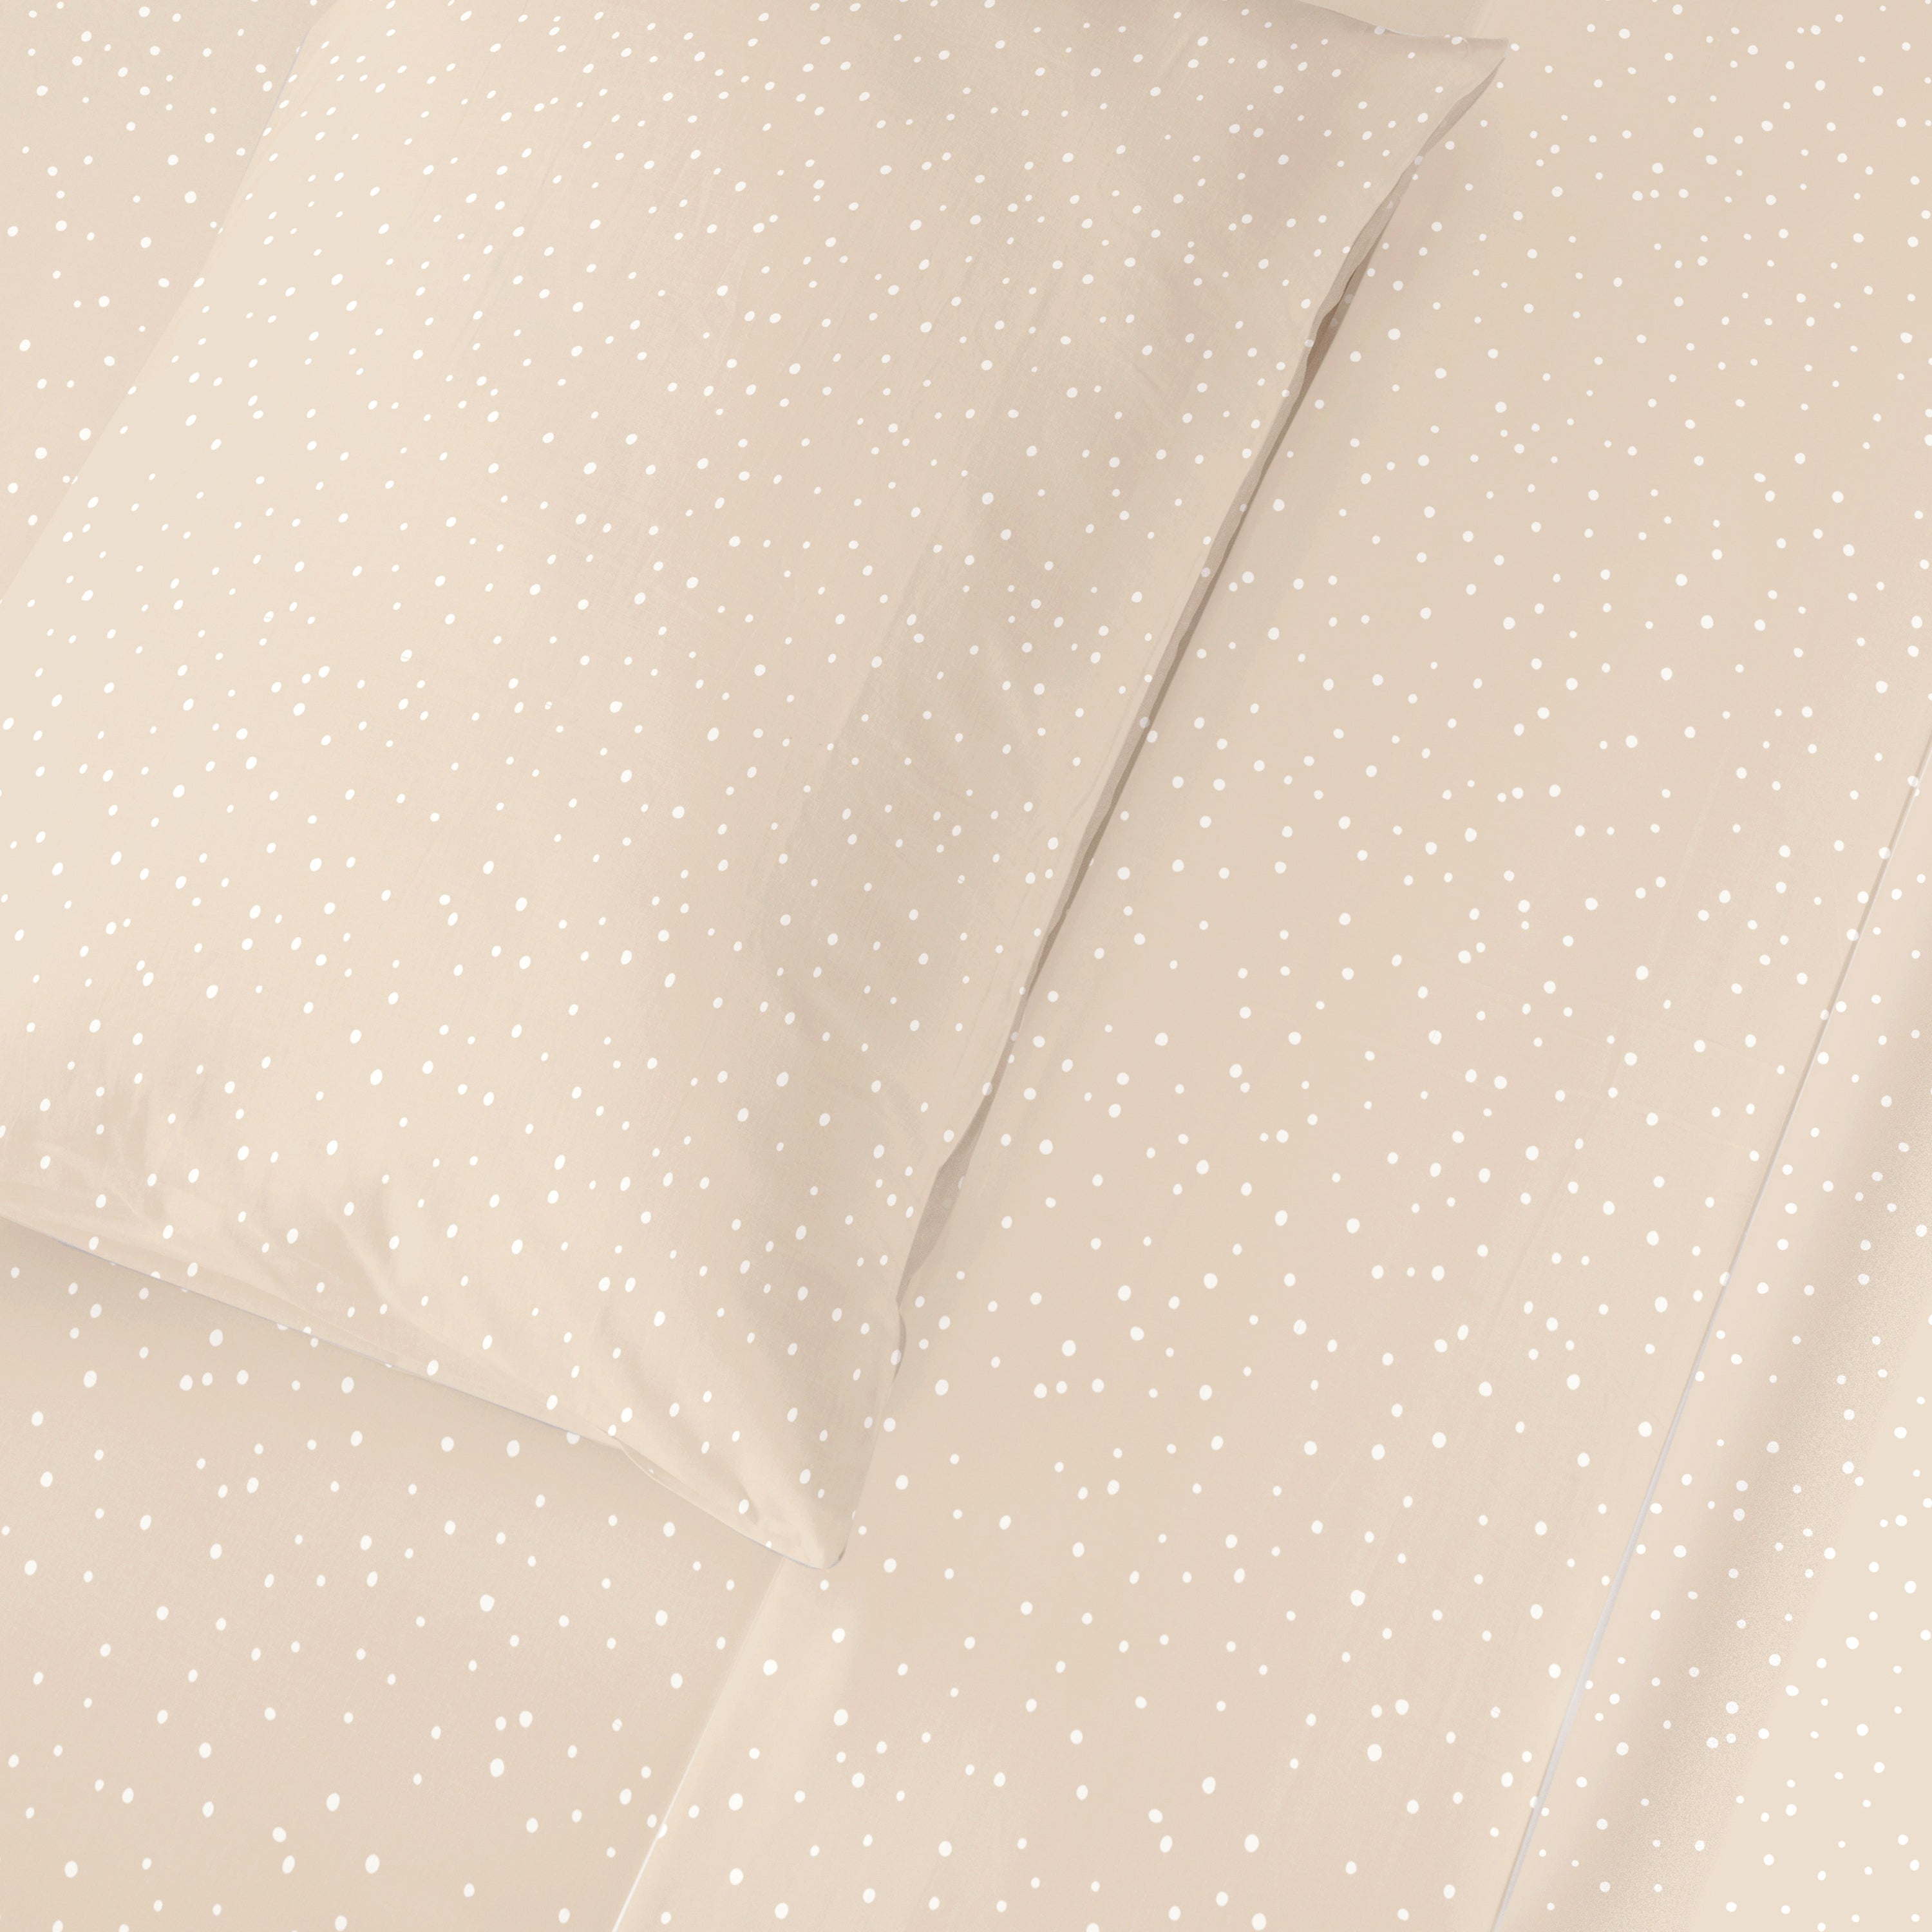 Two beige pillows with a dotted pattern on a Makemake Organics Organic Cotton Sheet Set in Polka Dots, arranged neatly and viewed from above.